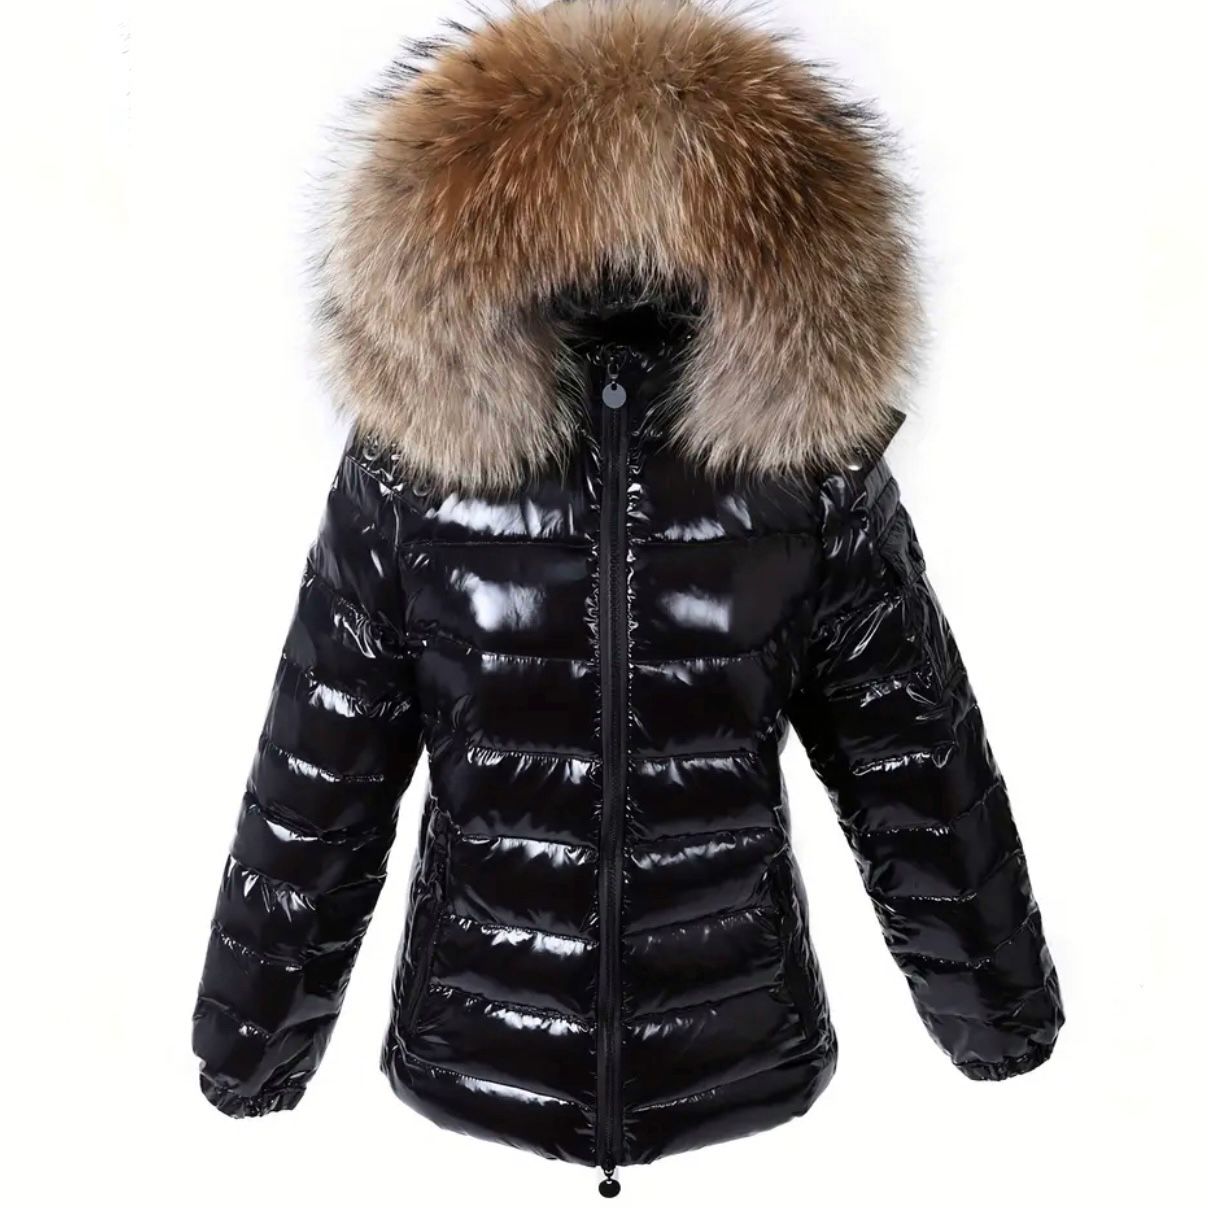 Down glossy puffer jacket Bomber jacket real raccoon fur coat trench hooded slim